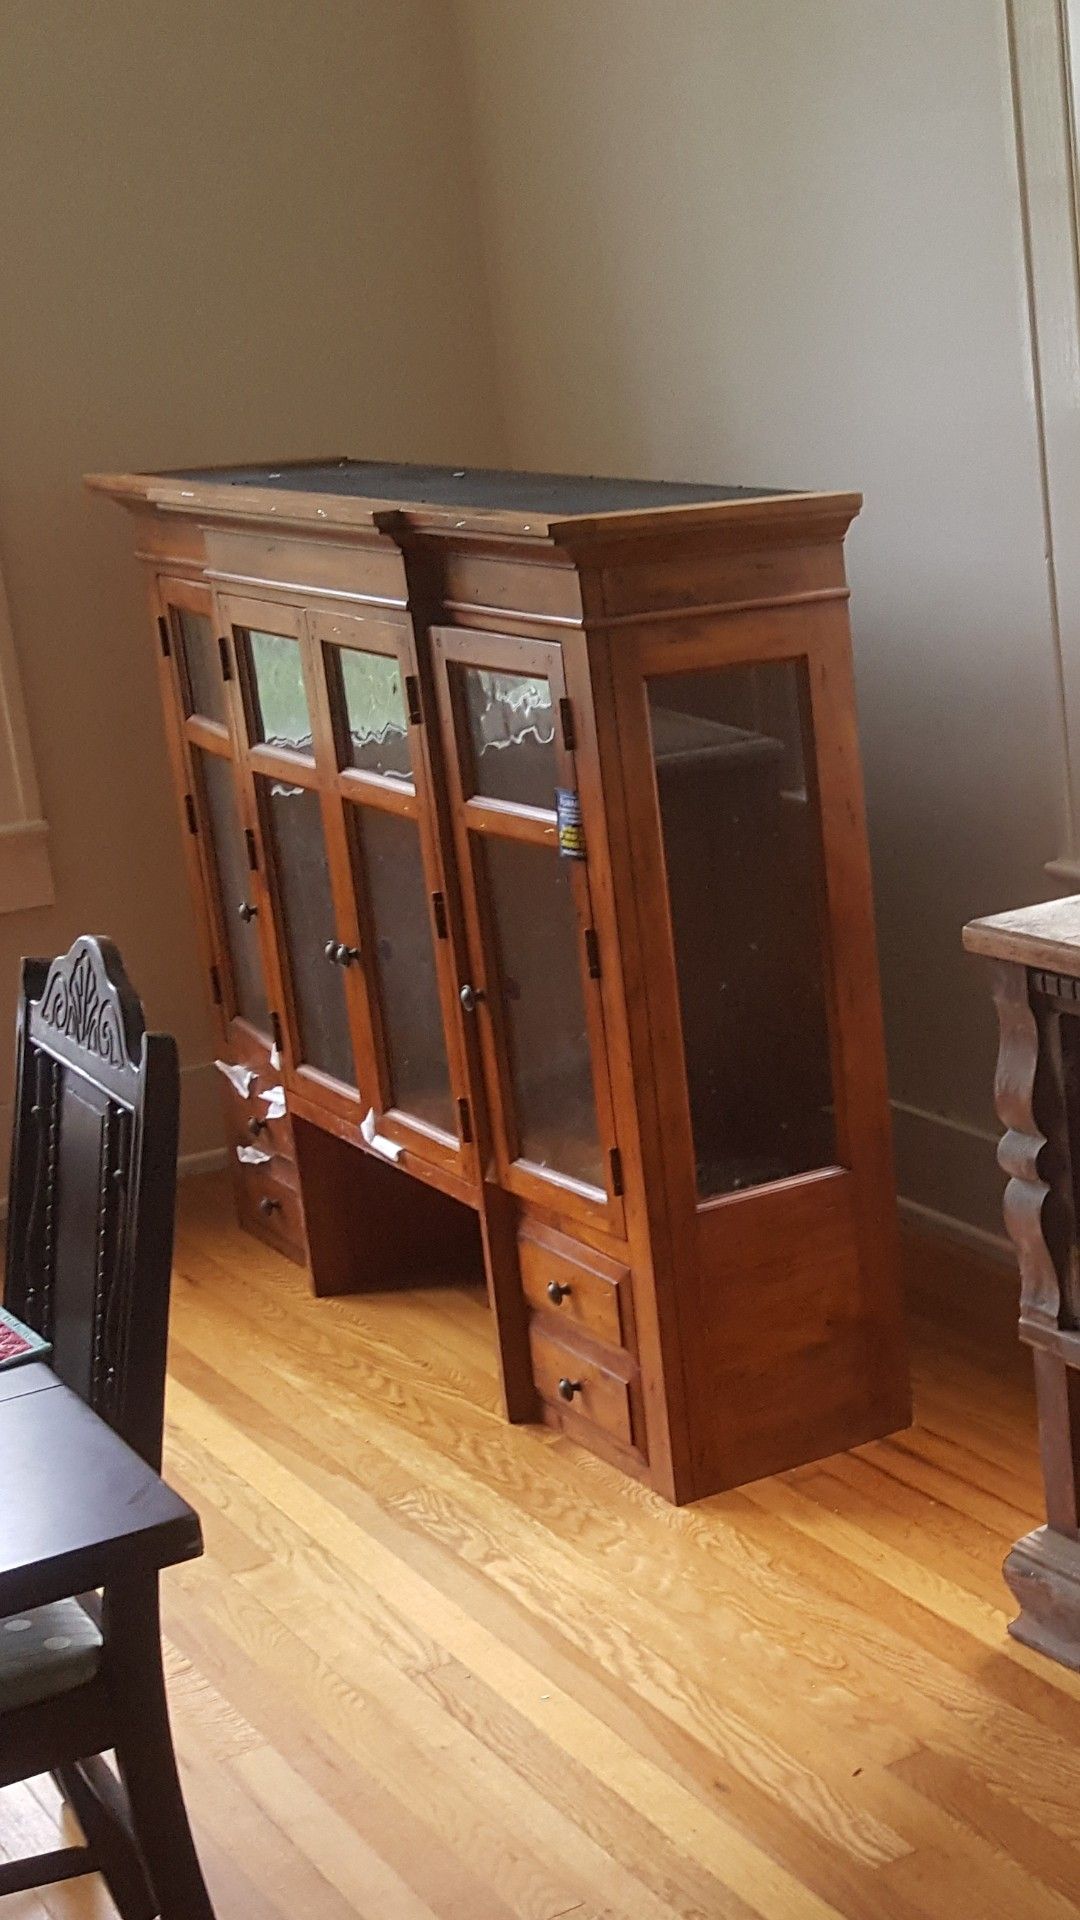 Brand new Hutch top for sale